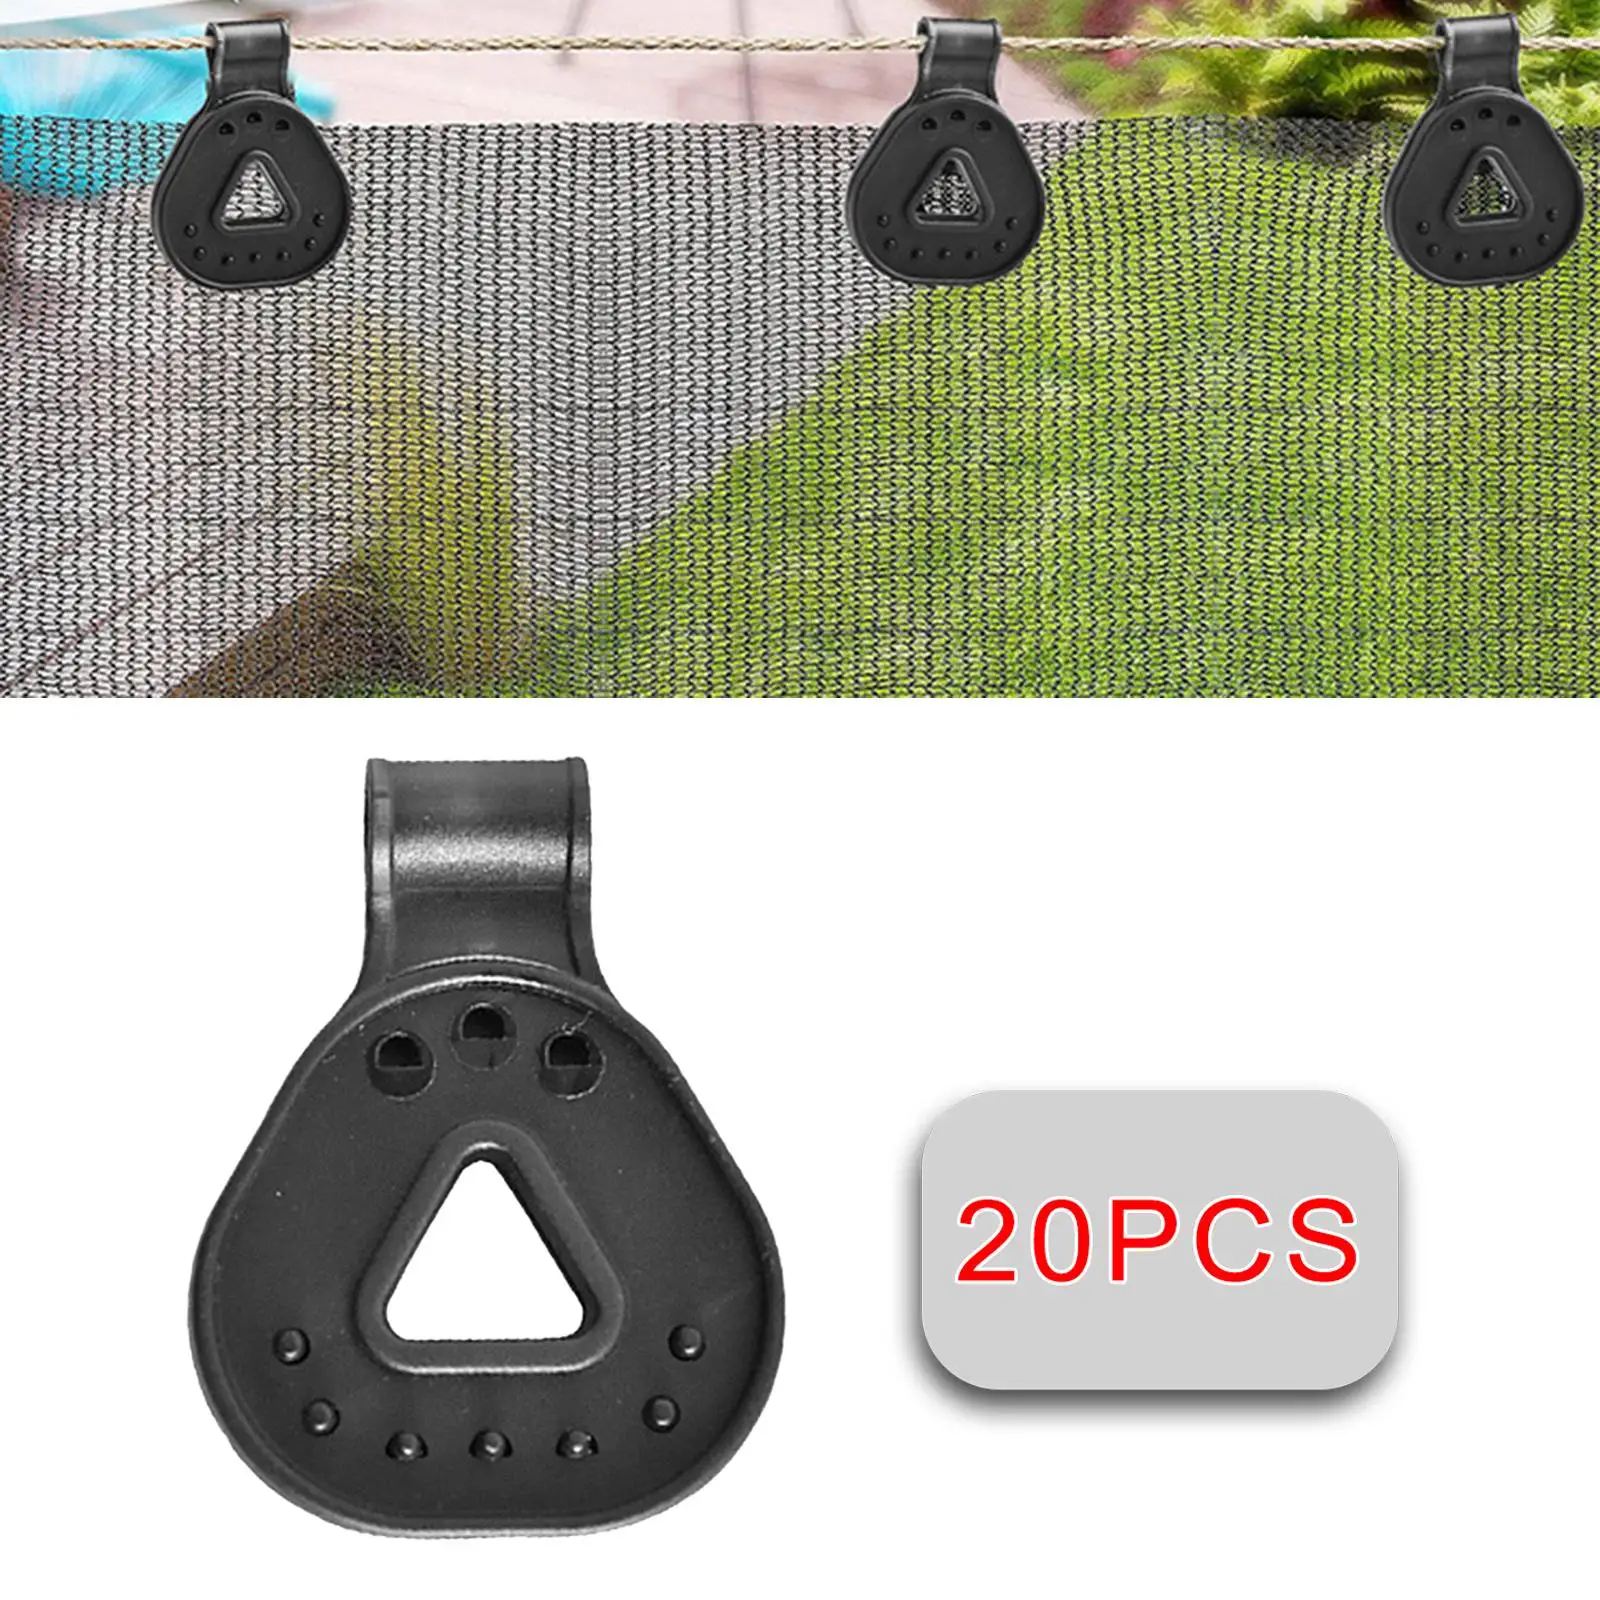 10/20 Pcs Tarp Clips, Tent Tarpaulin Clamps for Holding Up Tarp, Canopy Car Cover  Boat Cover Temporary Projector Screen